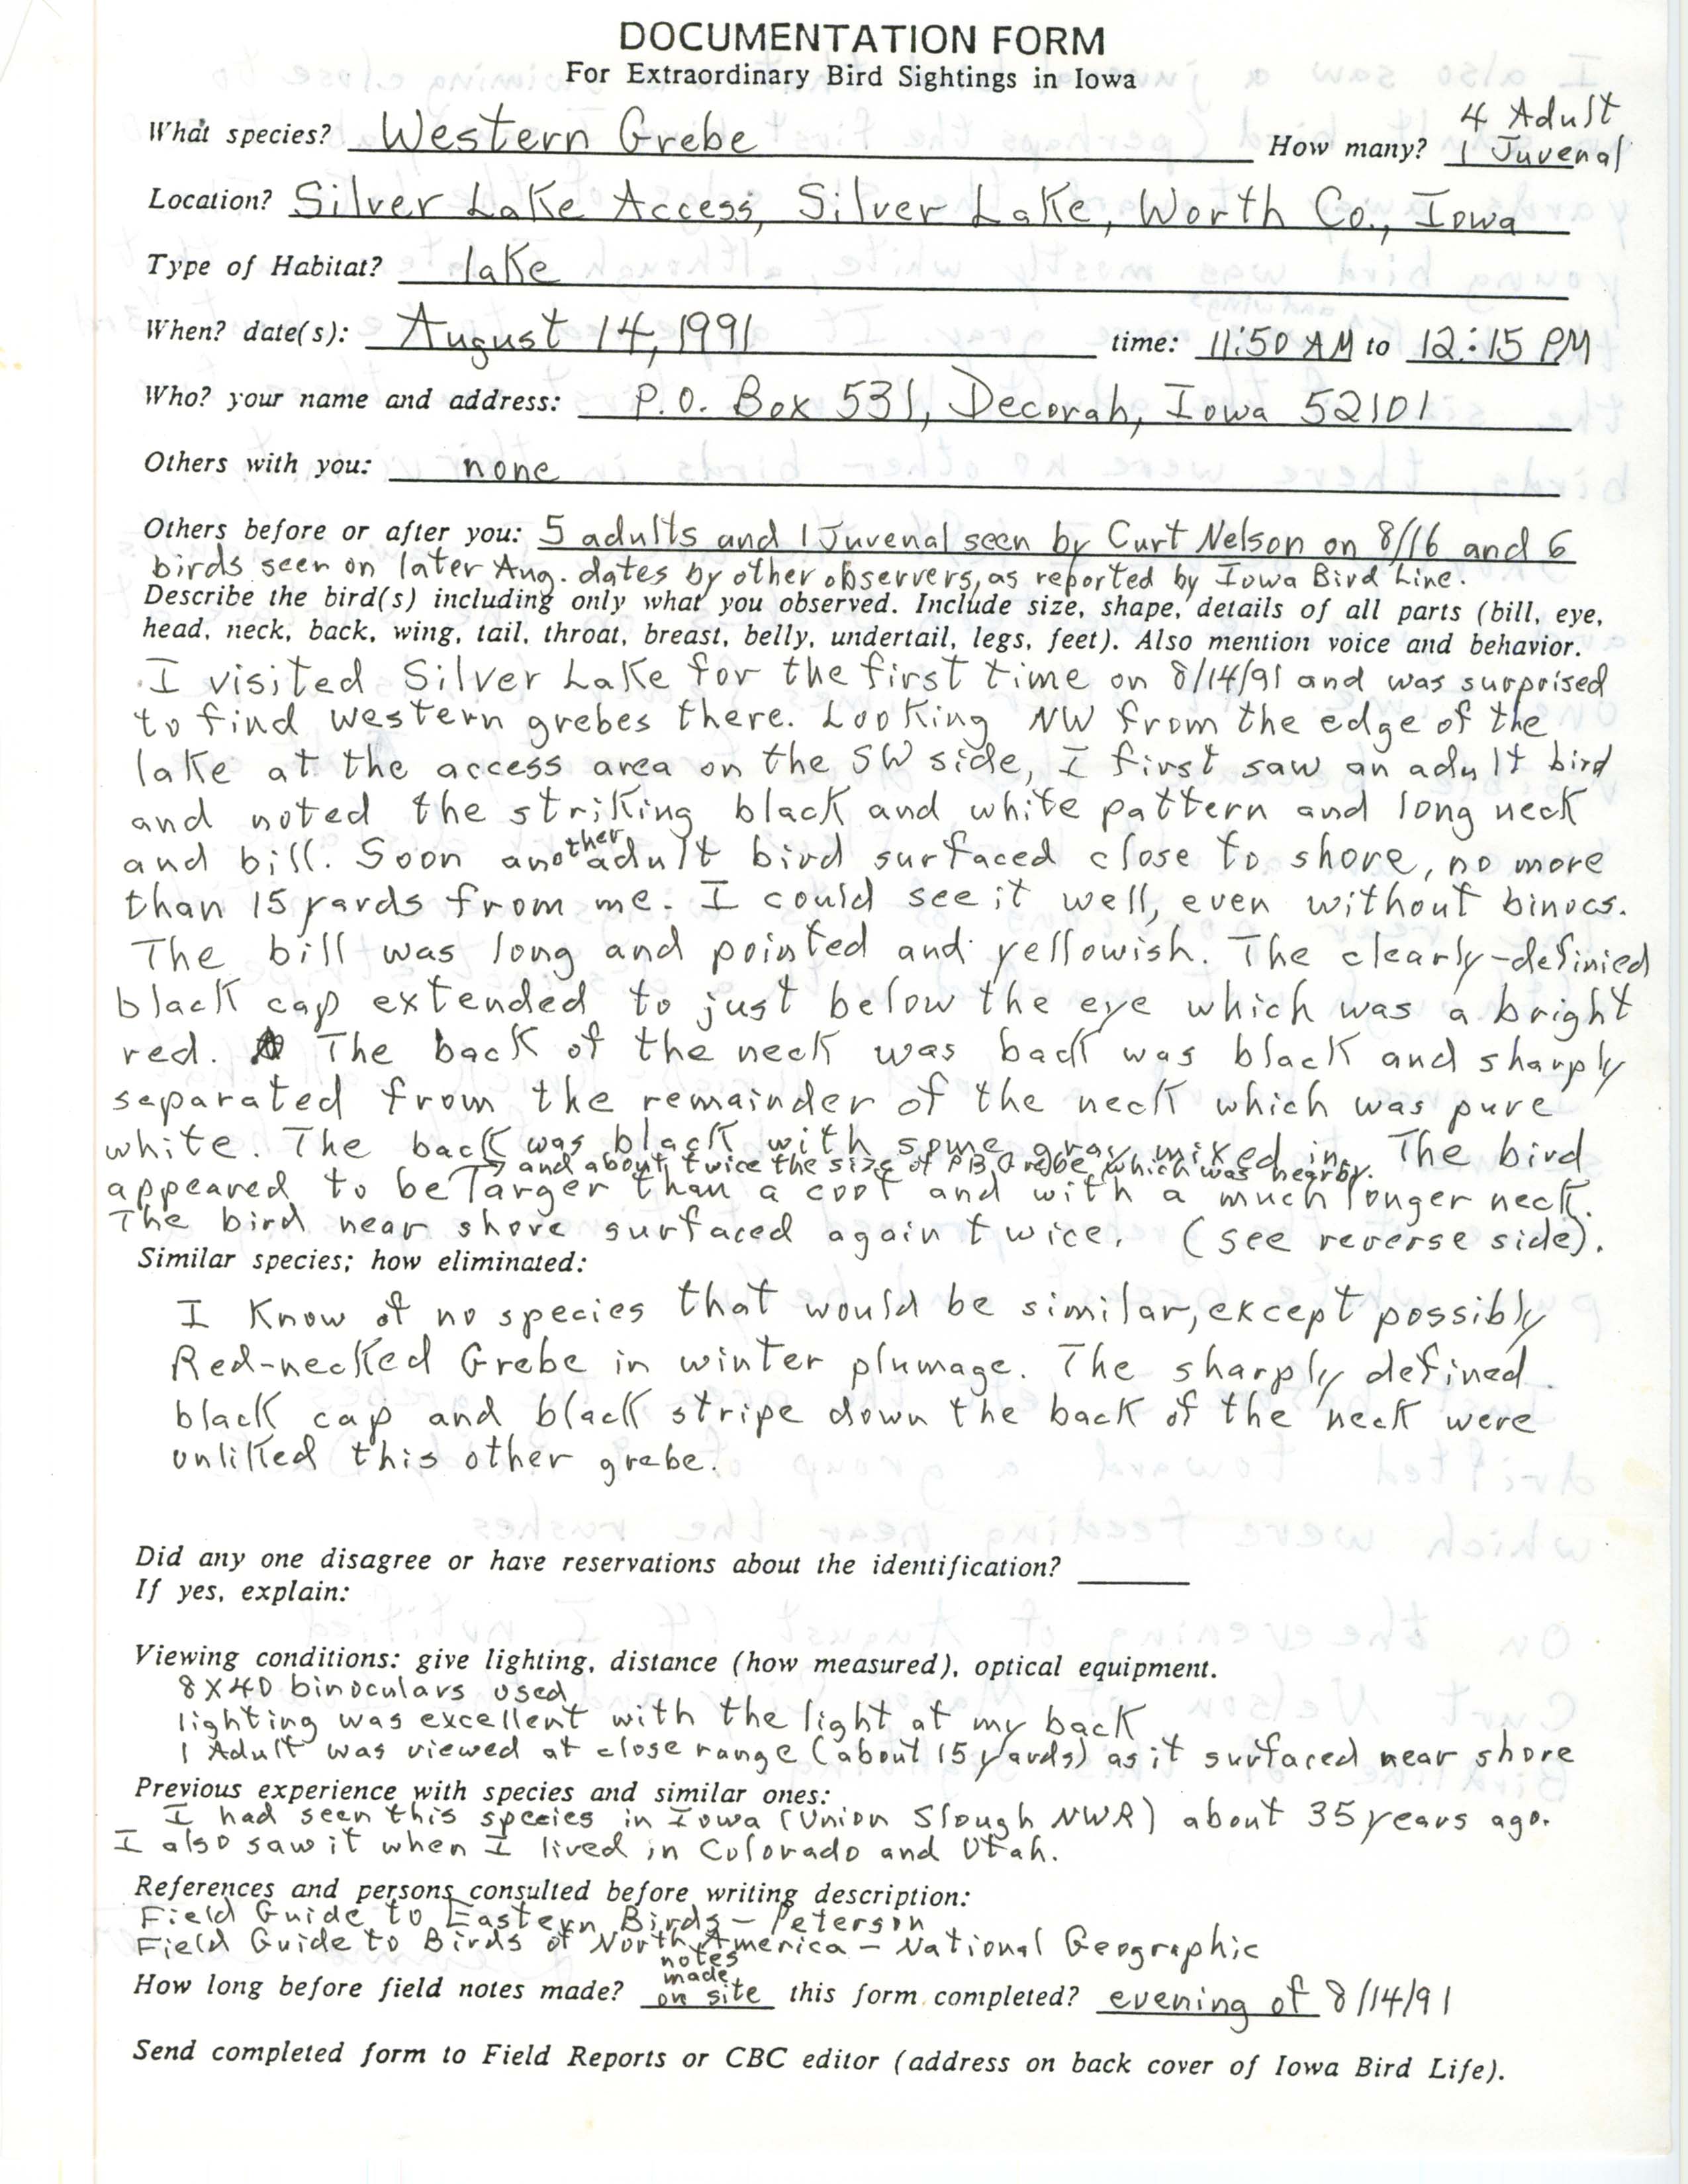 Rare bird documentation form for Western Grebe at Silver Lake Access, 1991